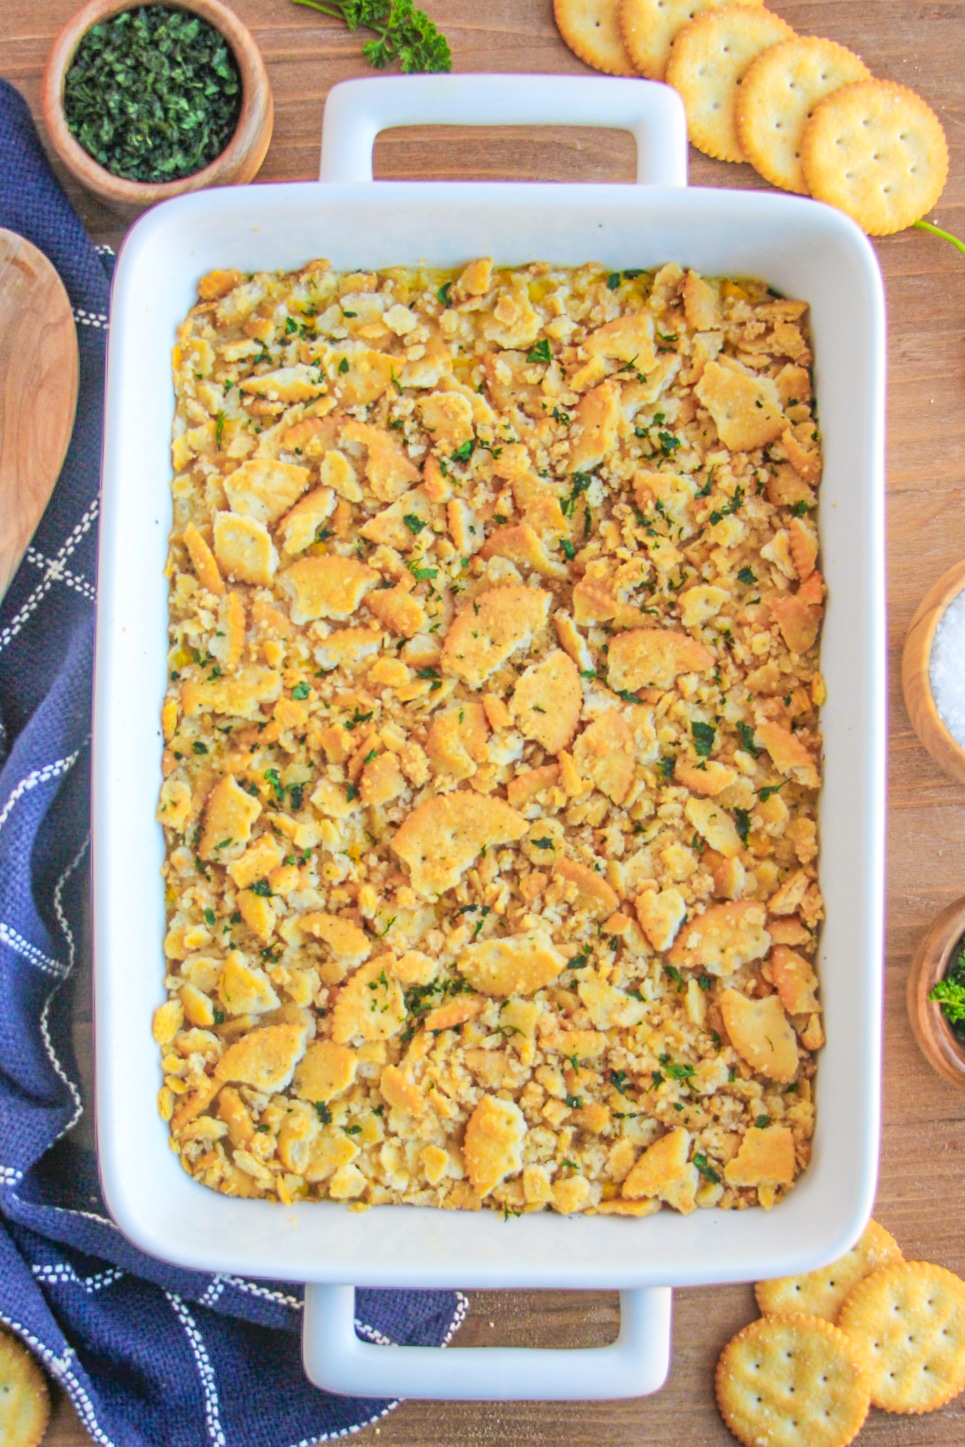 Corn Casserole in a white baking dish garnished with chopped parsley.